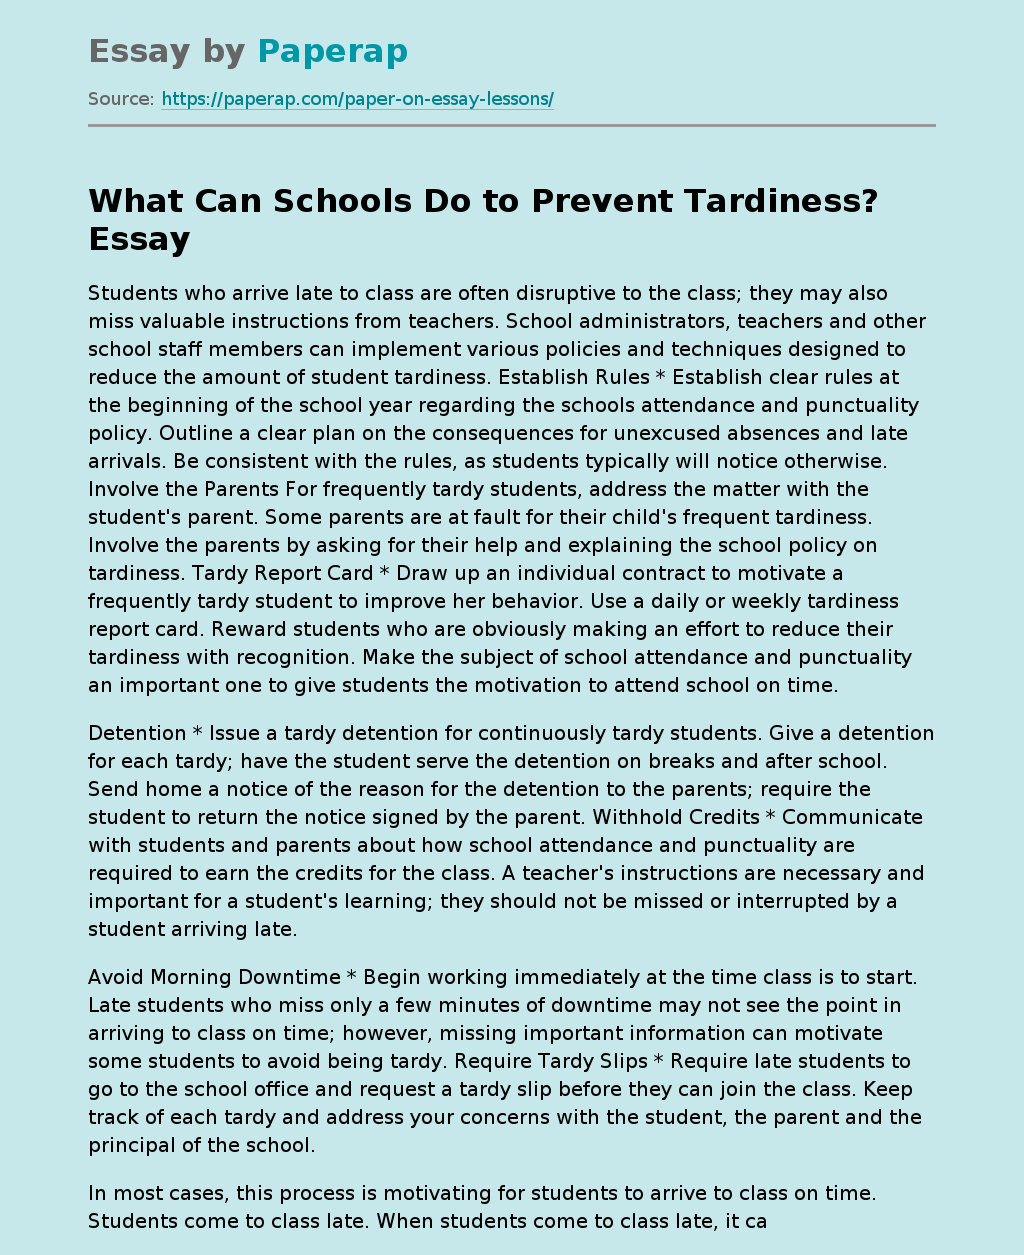 What Can Schools Do to Prevent Tardiness?